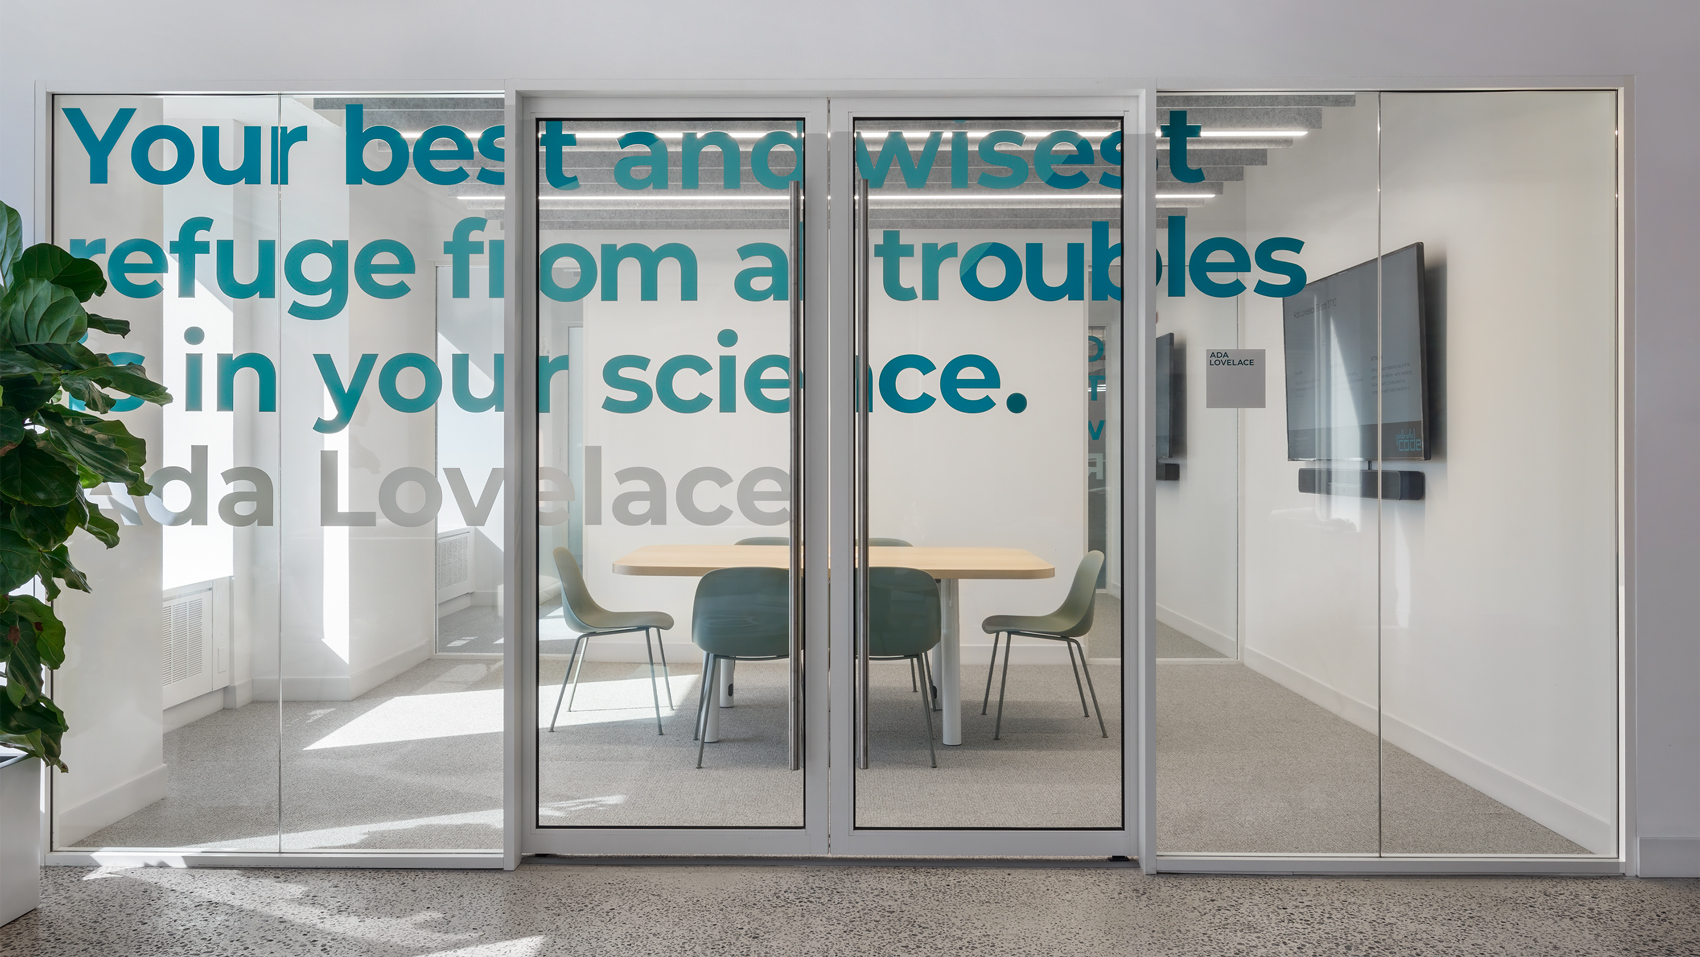 Glass graphics for Girls Who Code